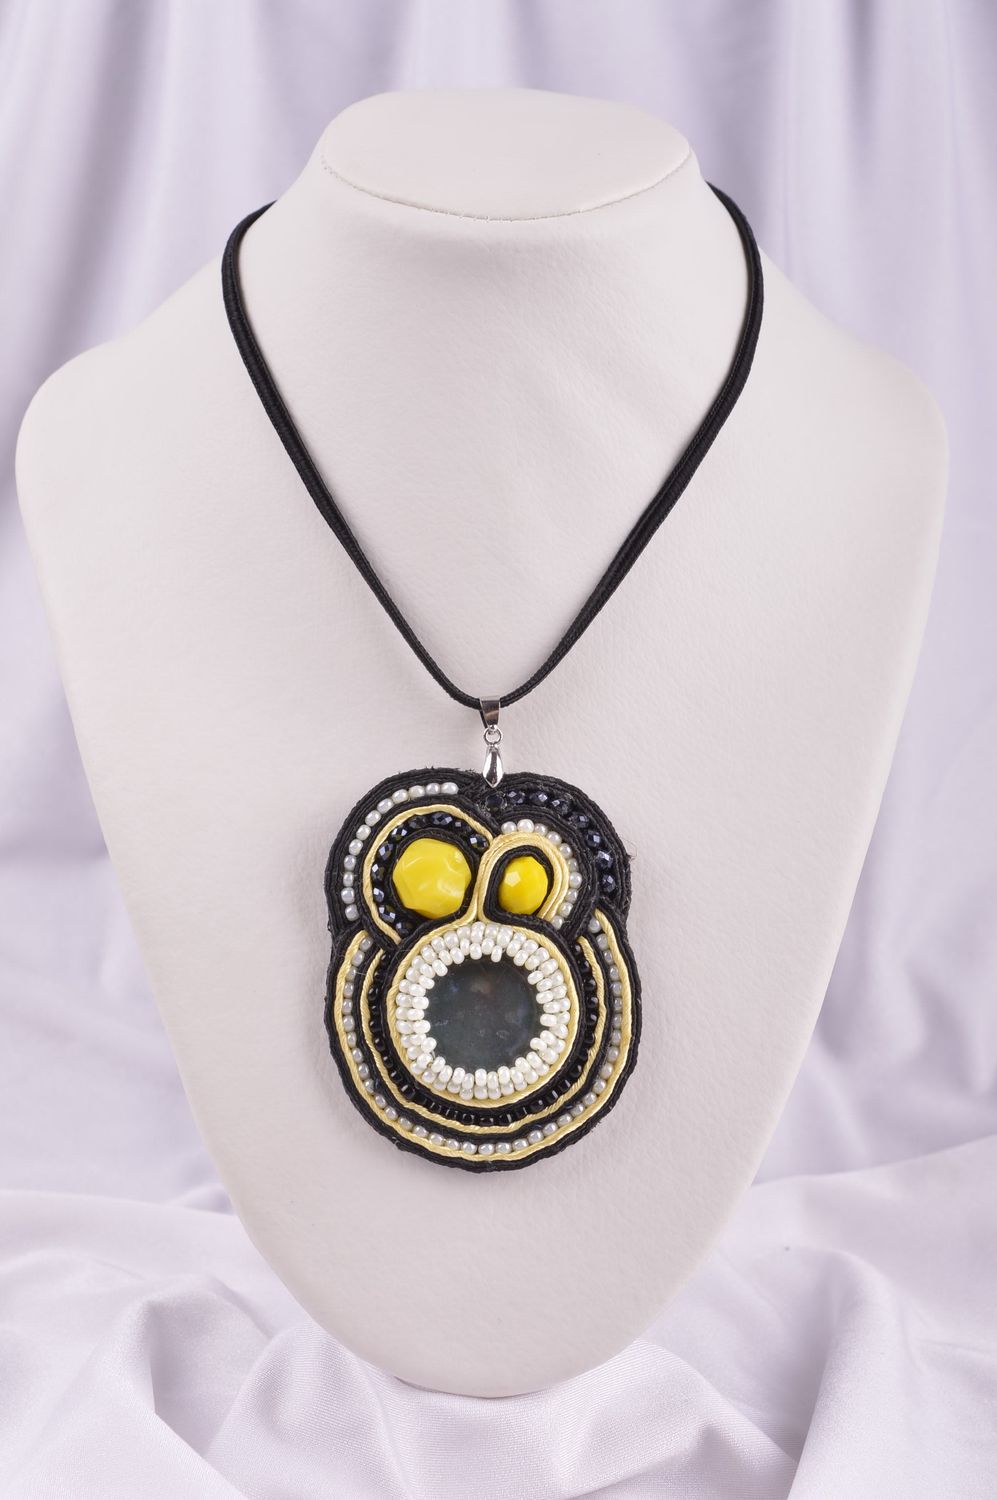 Unusual handmade textile necklace soutache jewelry designs gifts for her photo 1